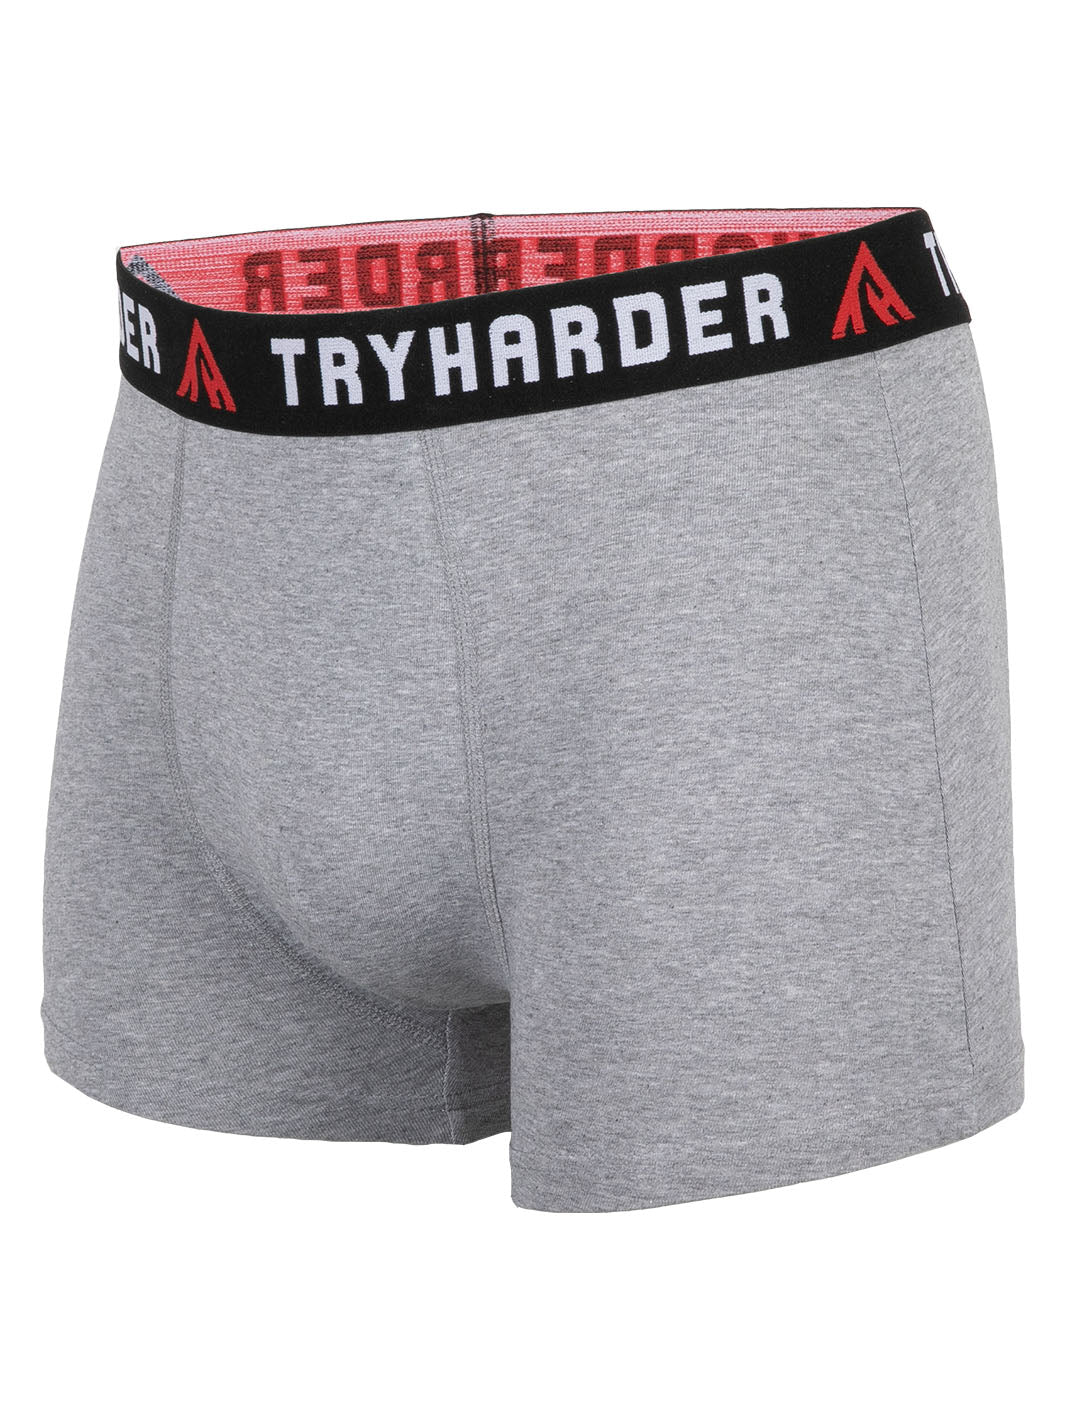 TRYHARDER - Boxer - Grey 2 pack